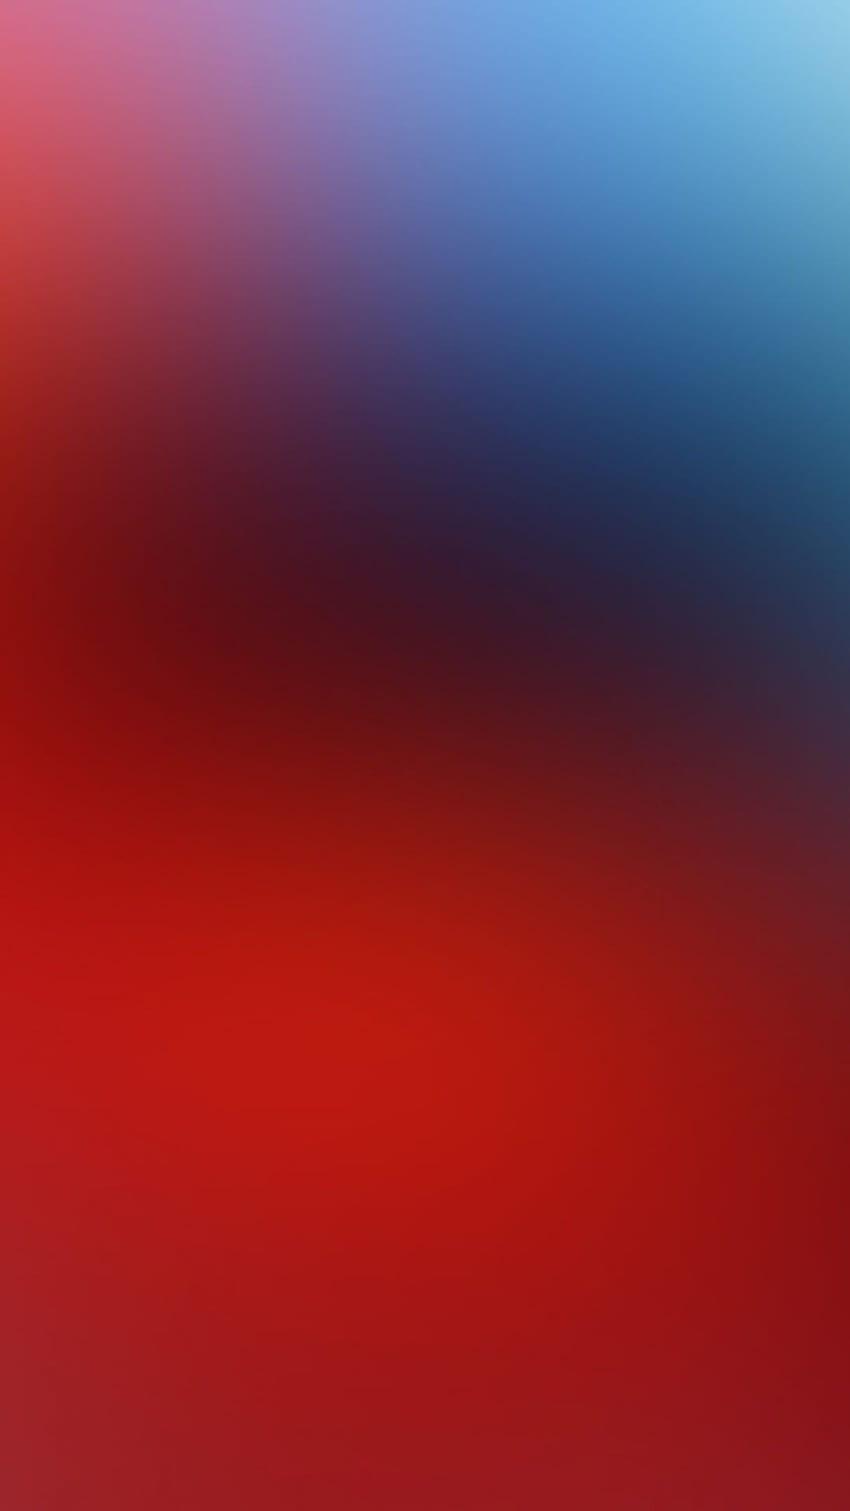 Abstract Red And White Android Backgrounds in 2020, red white blue HD phone wallpaper